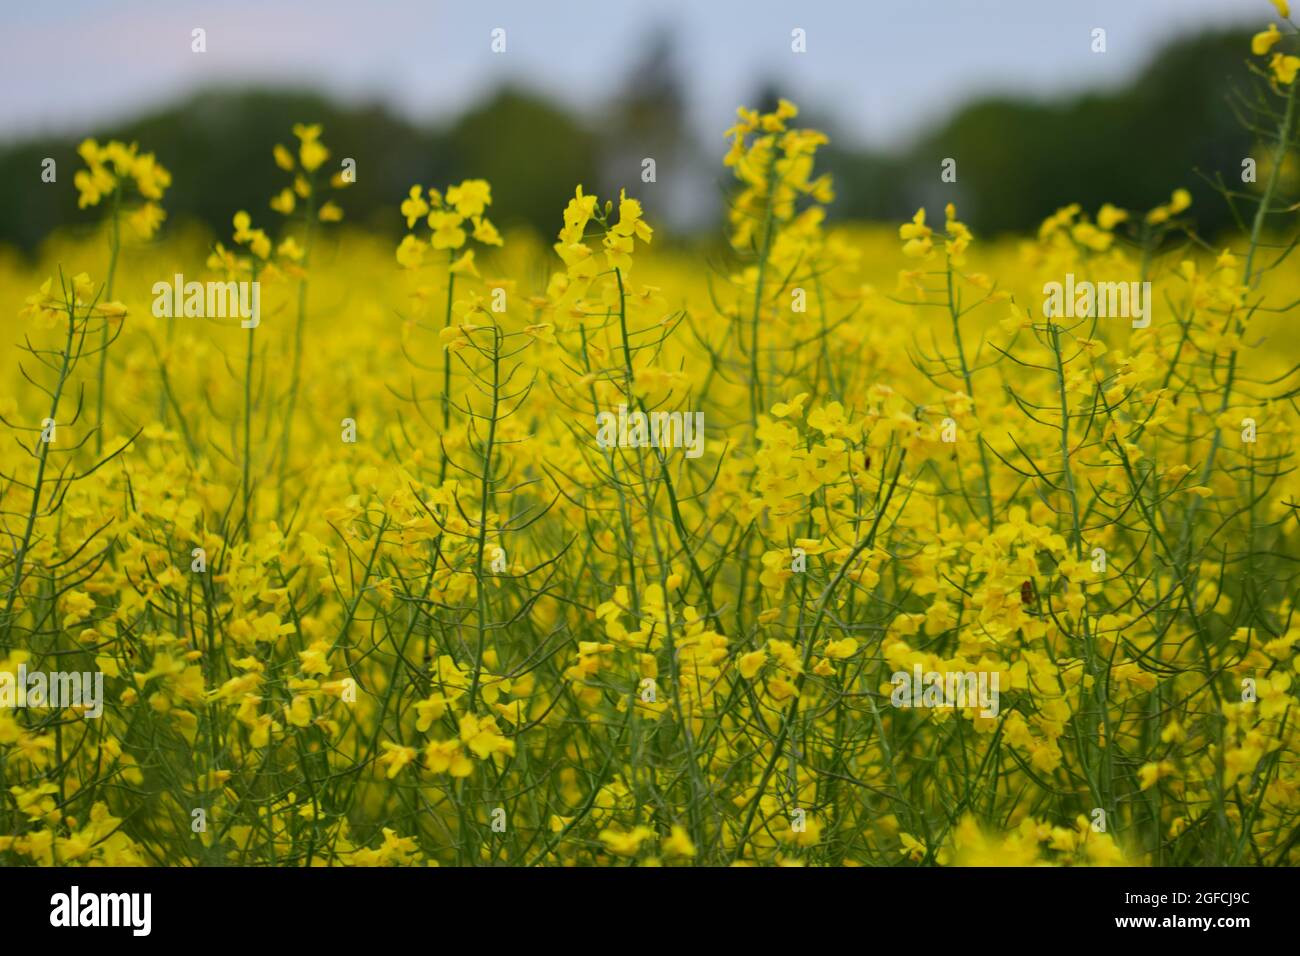 A close up of a yellow rapeseed field Stock Photo